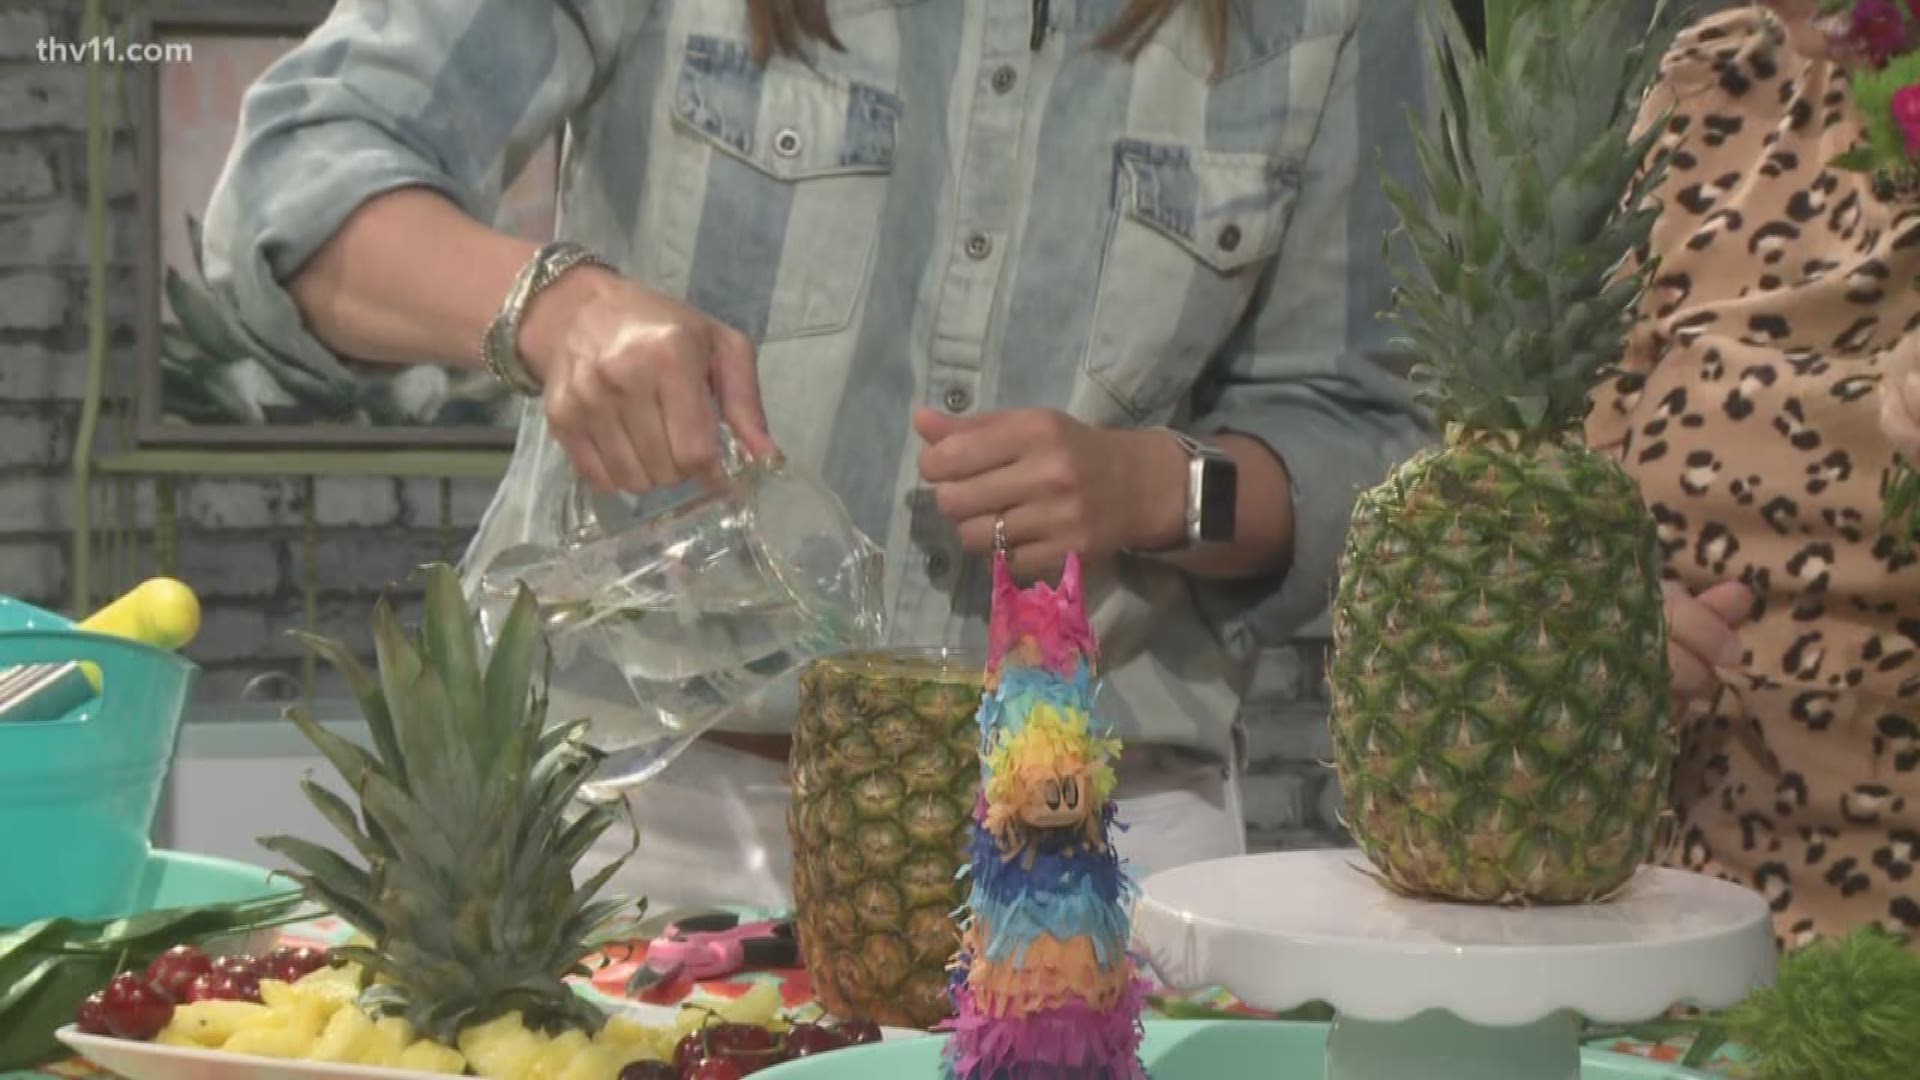 Krista Ryken with K to Z Design showed The Vine's Ashley King how to use a pineapple to create a summer-inspired flower vase.